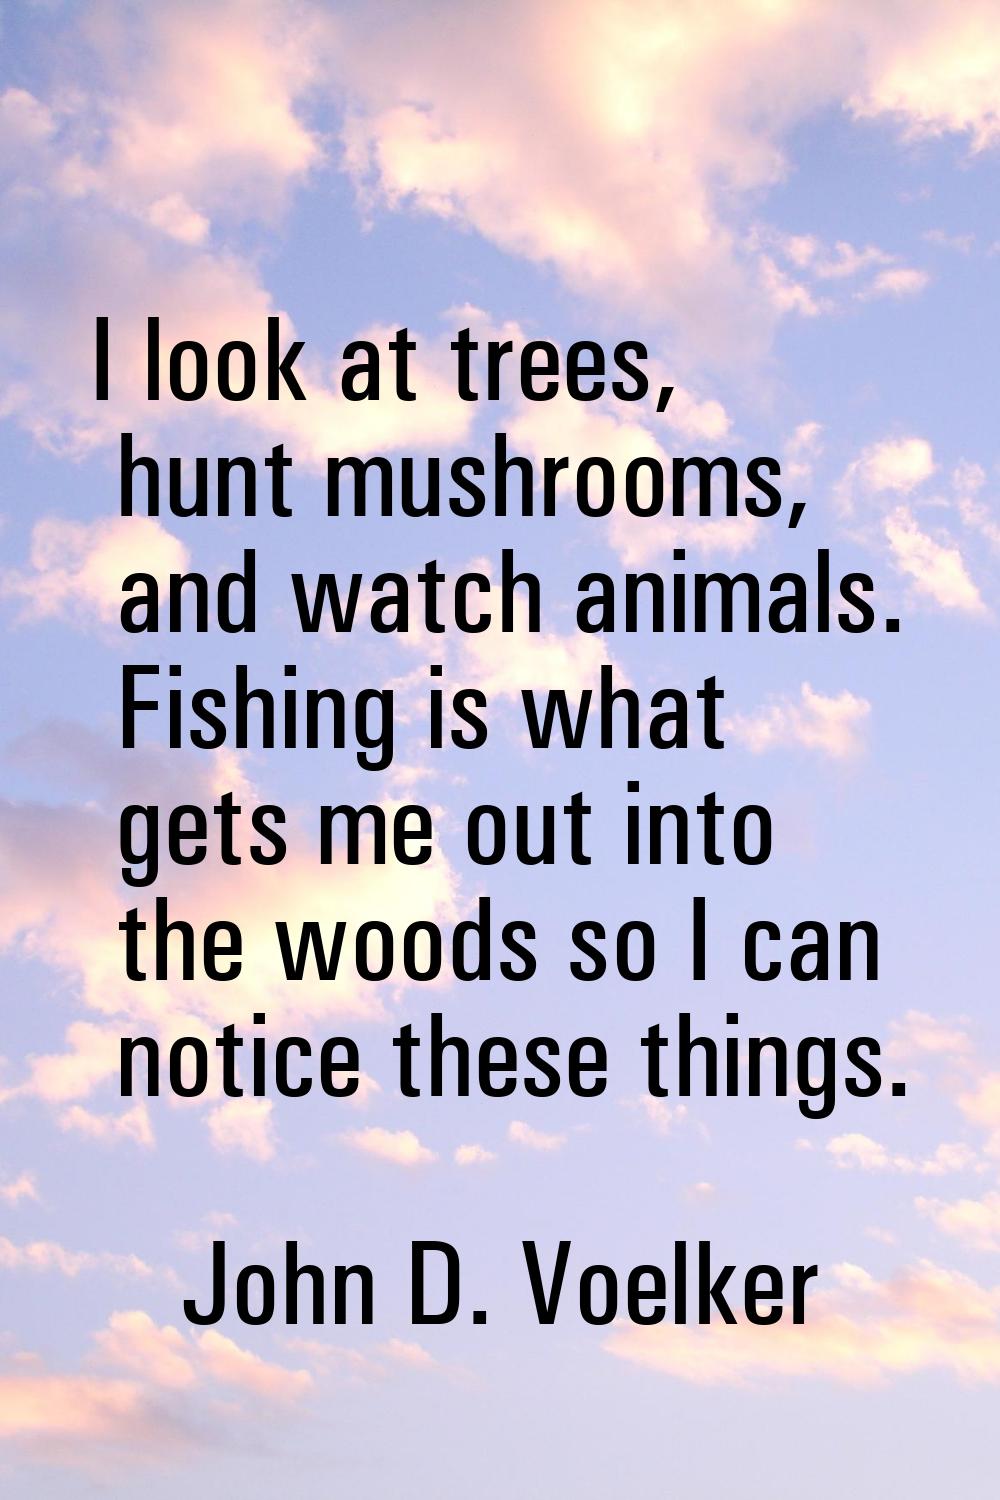 I look at trees, hunt mushrooms, and watch animals. Fishing is what gets me out into the woods so I